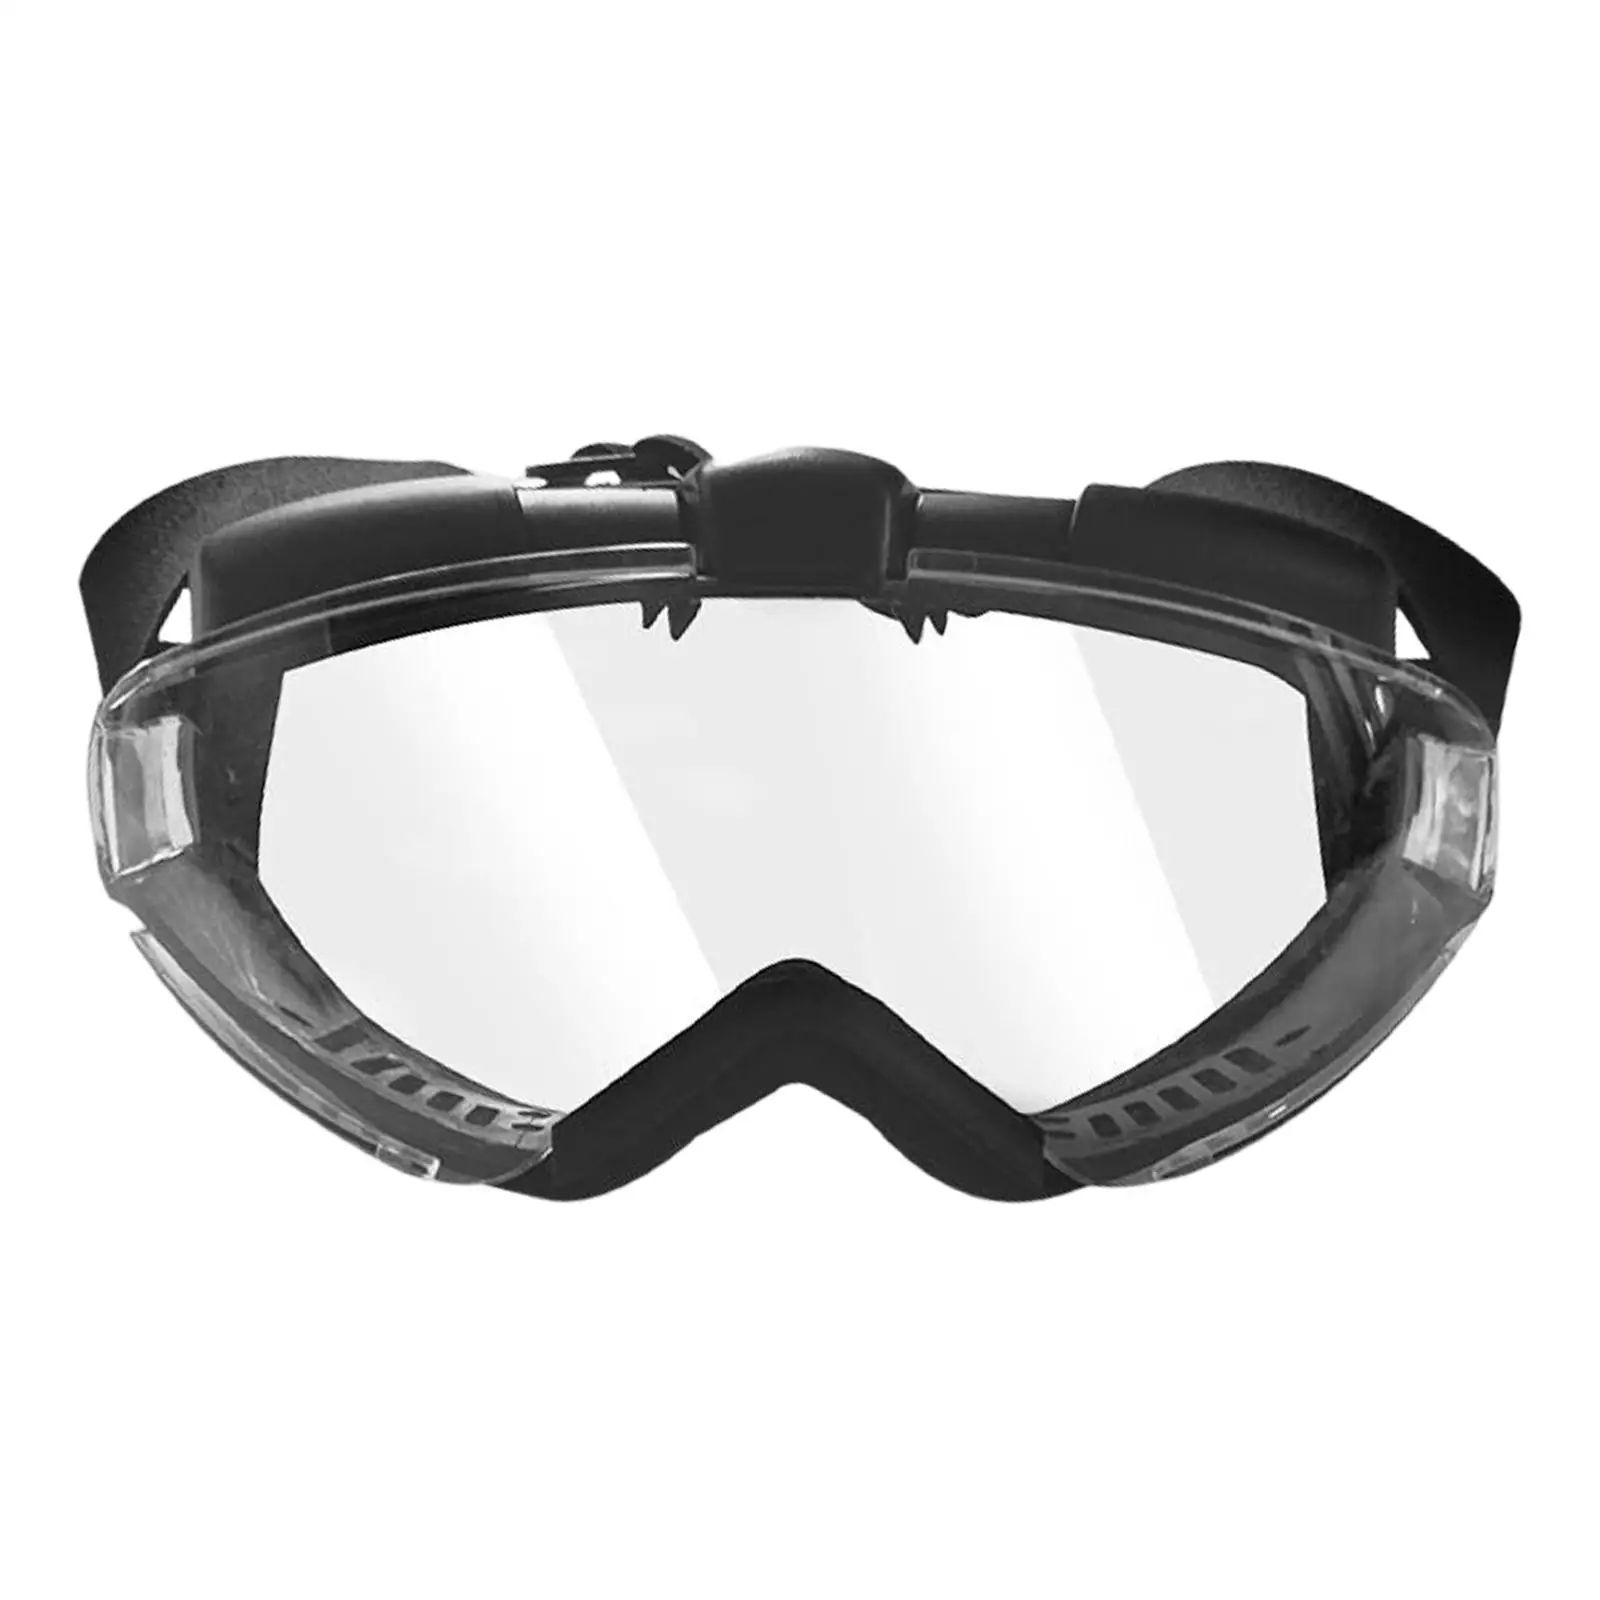 Outdoor Glasses Unisex with Adjustable Strap Windproof Dustproof Goggles